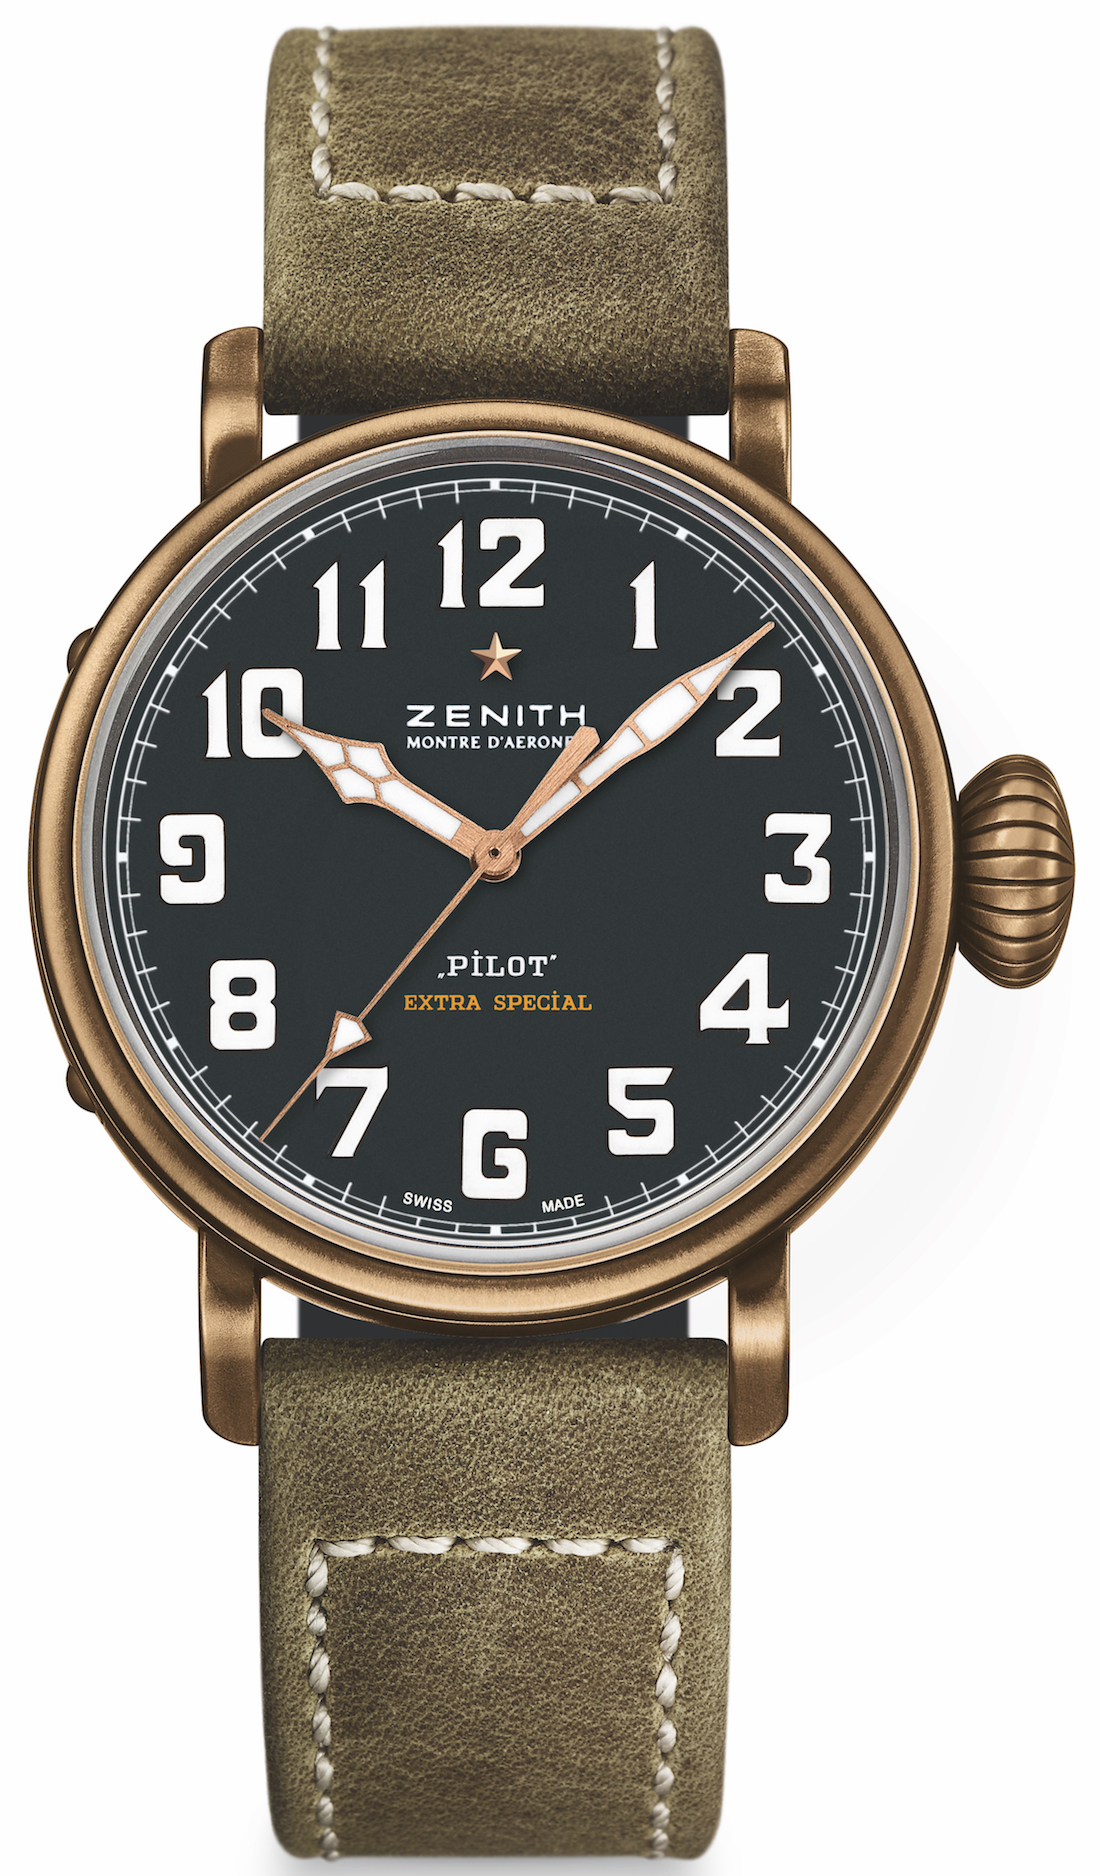 Continuing the vintage design style, with old steel case matching khaki frosted strap, this replica Zenith watch presents us a wonderful visual effect.